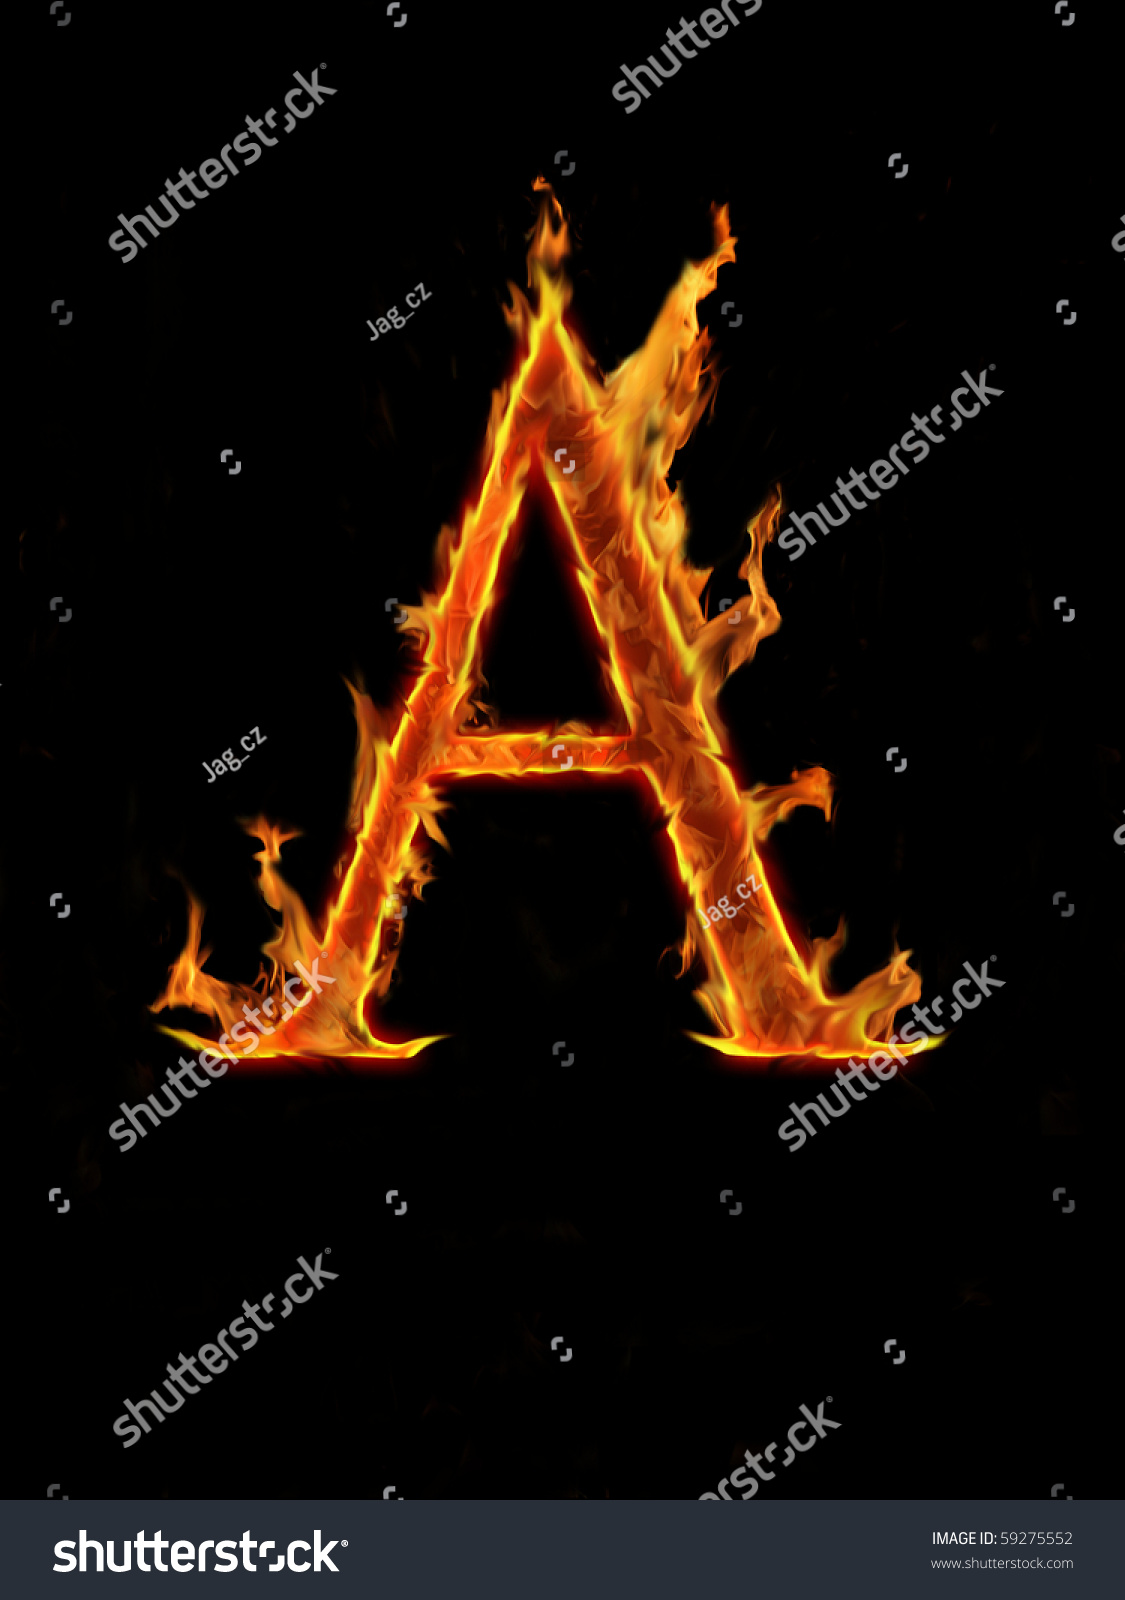 Flaming Font, Letter A Stock Photo 59275552 : Shutterstock